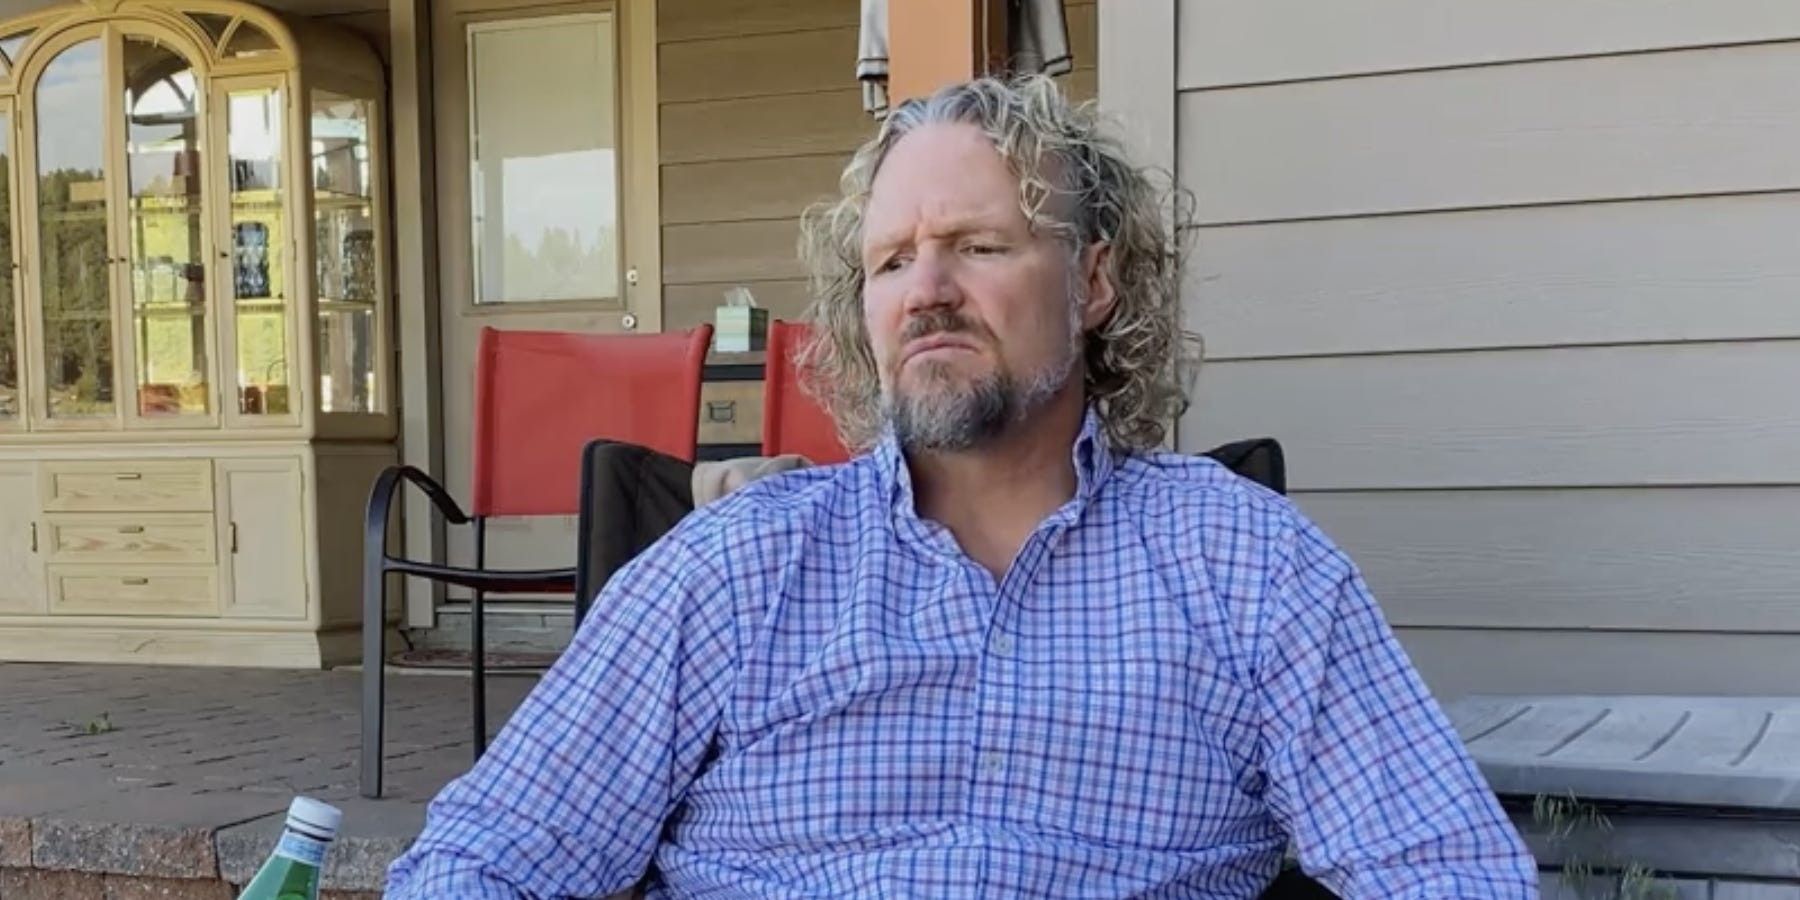 Kody Brown from Sister Wives sitting on porch looking upset